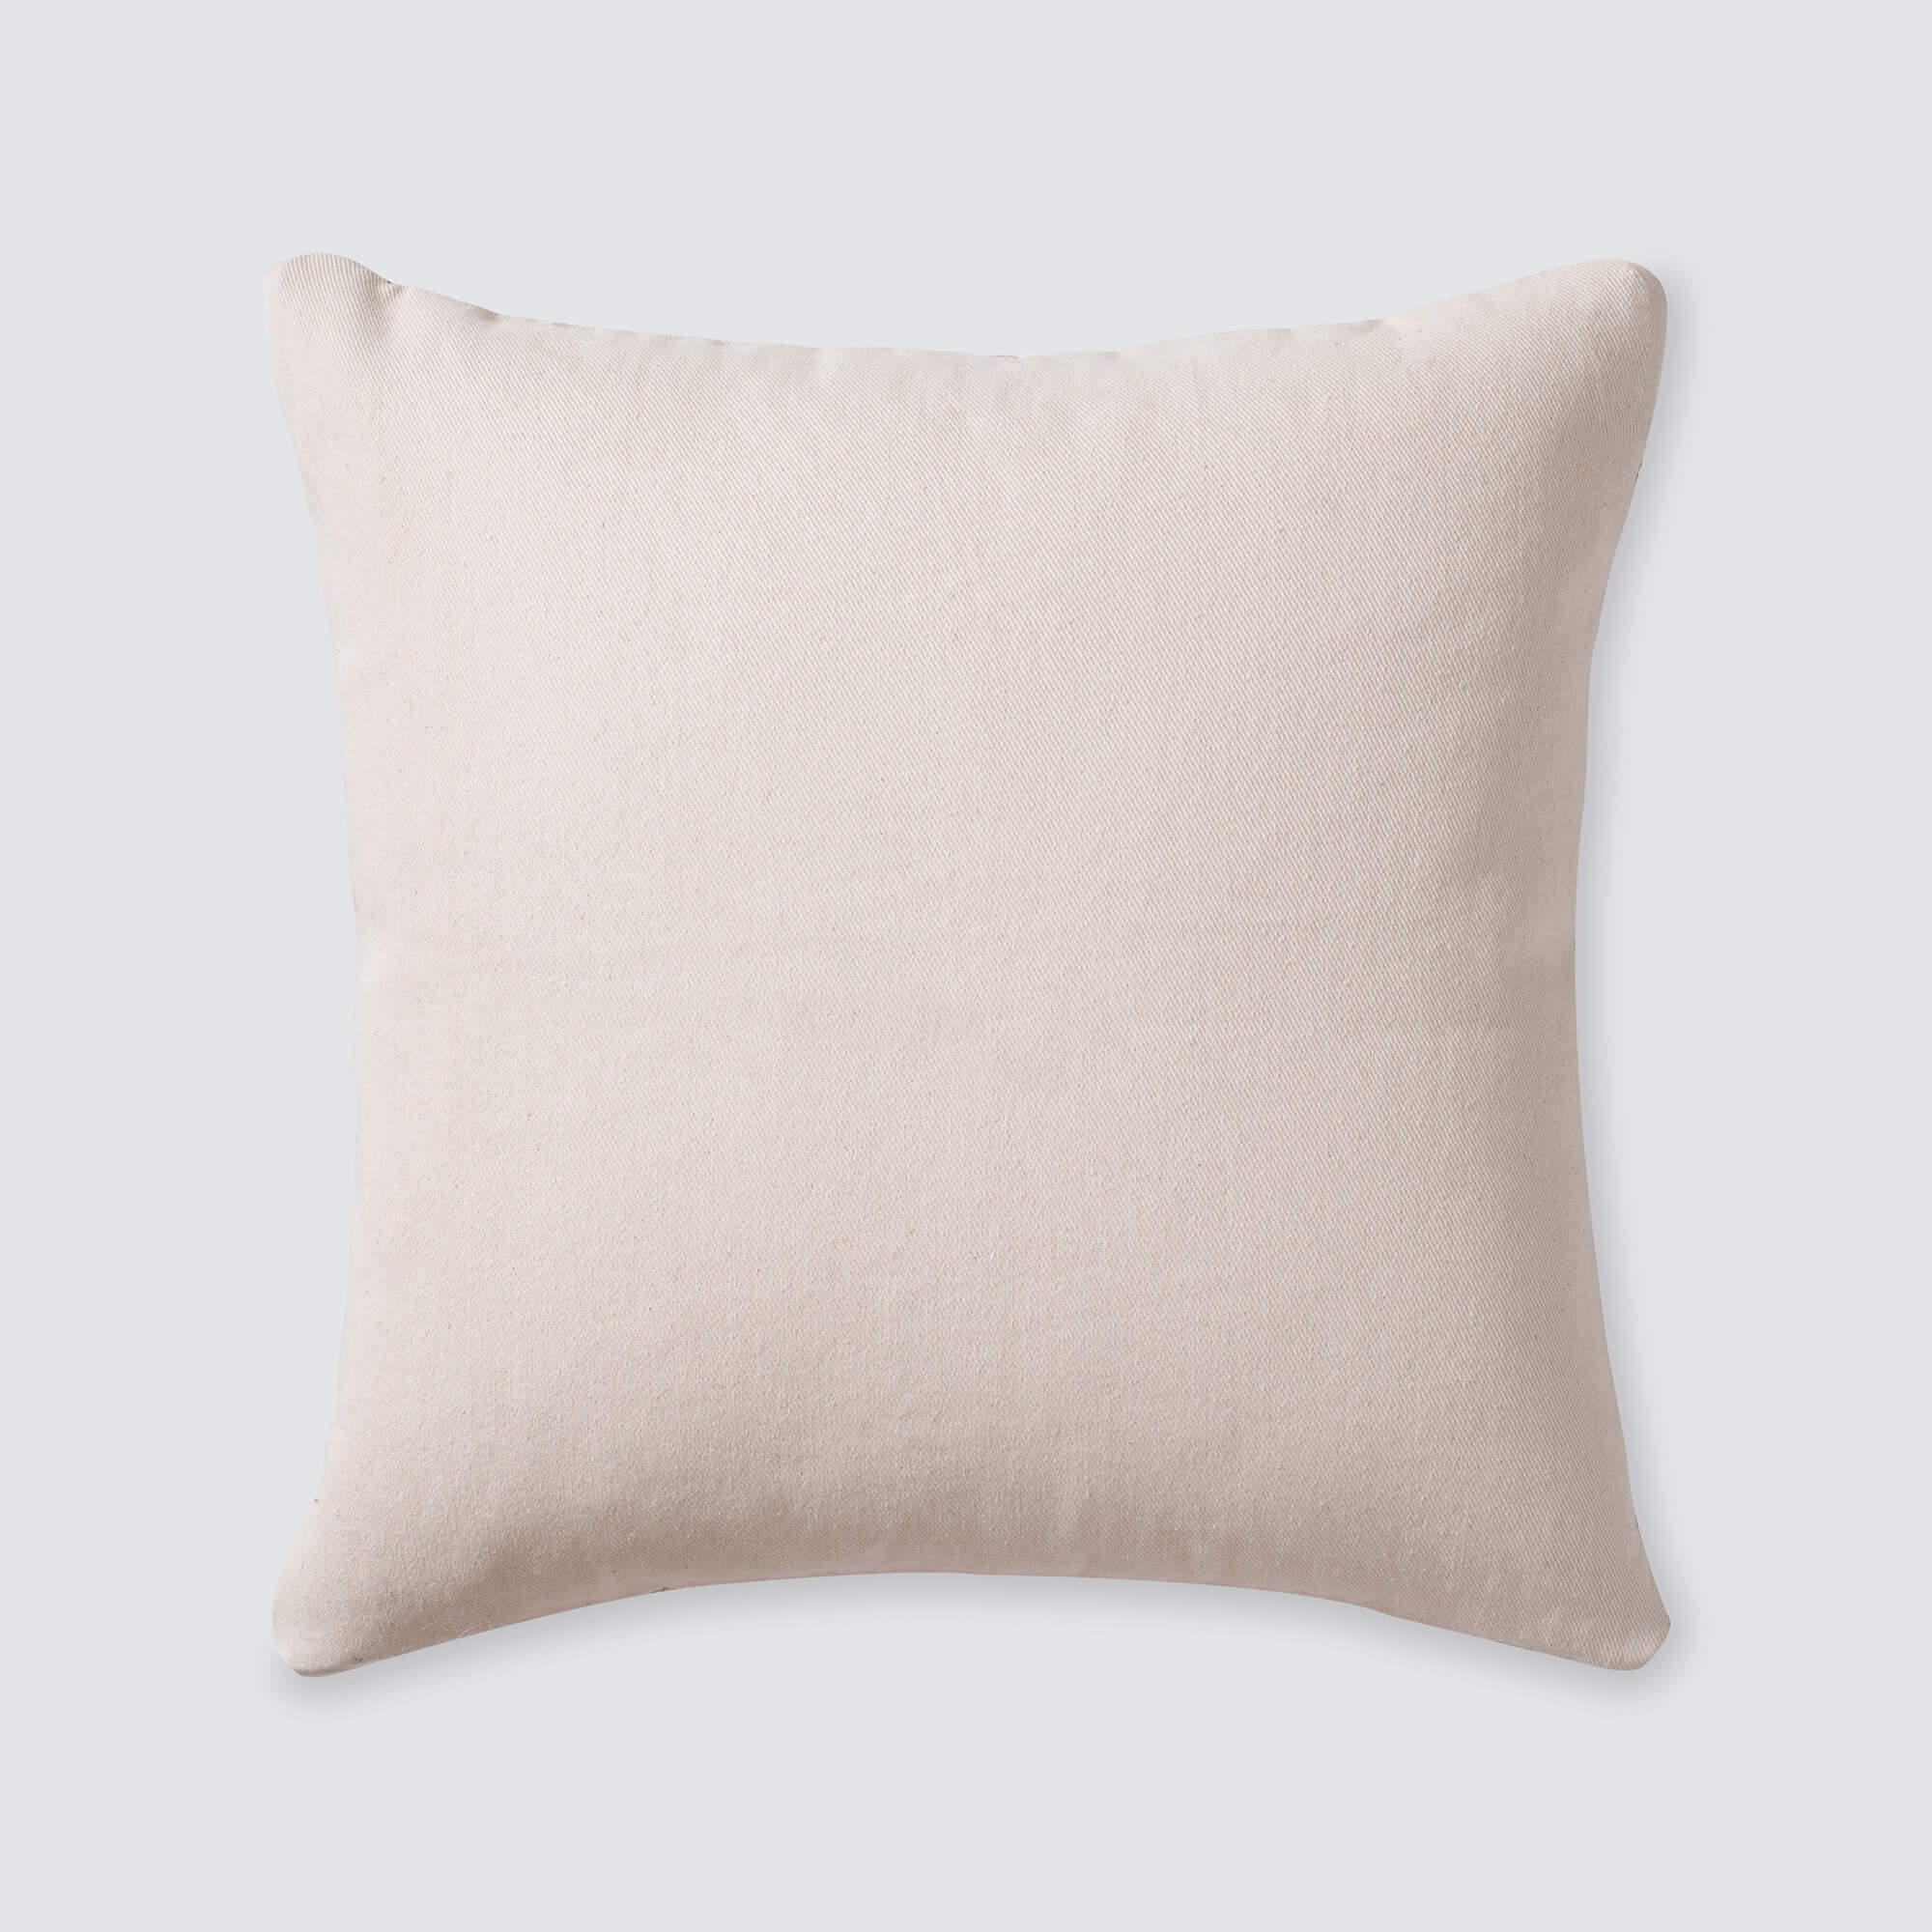 The Citizenry Claro Pillow | 20" x 20" | Camel - Image 5